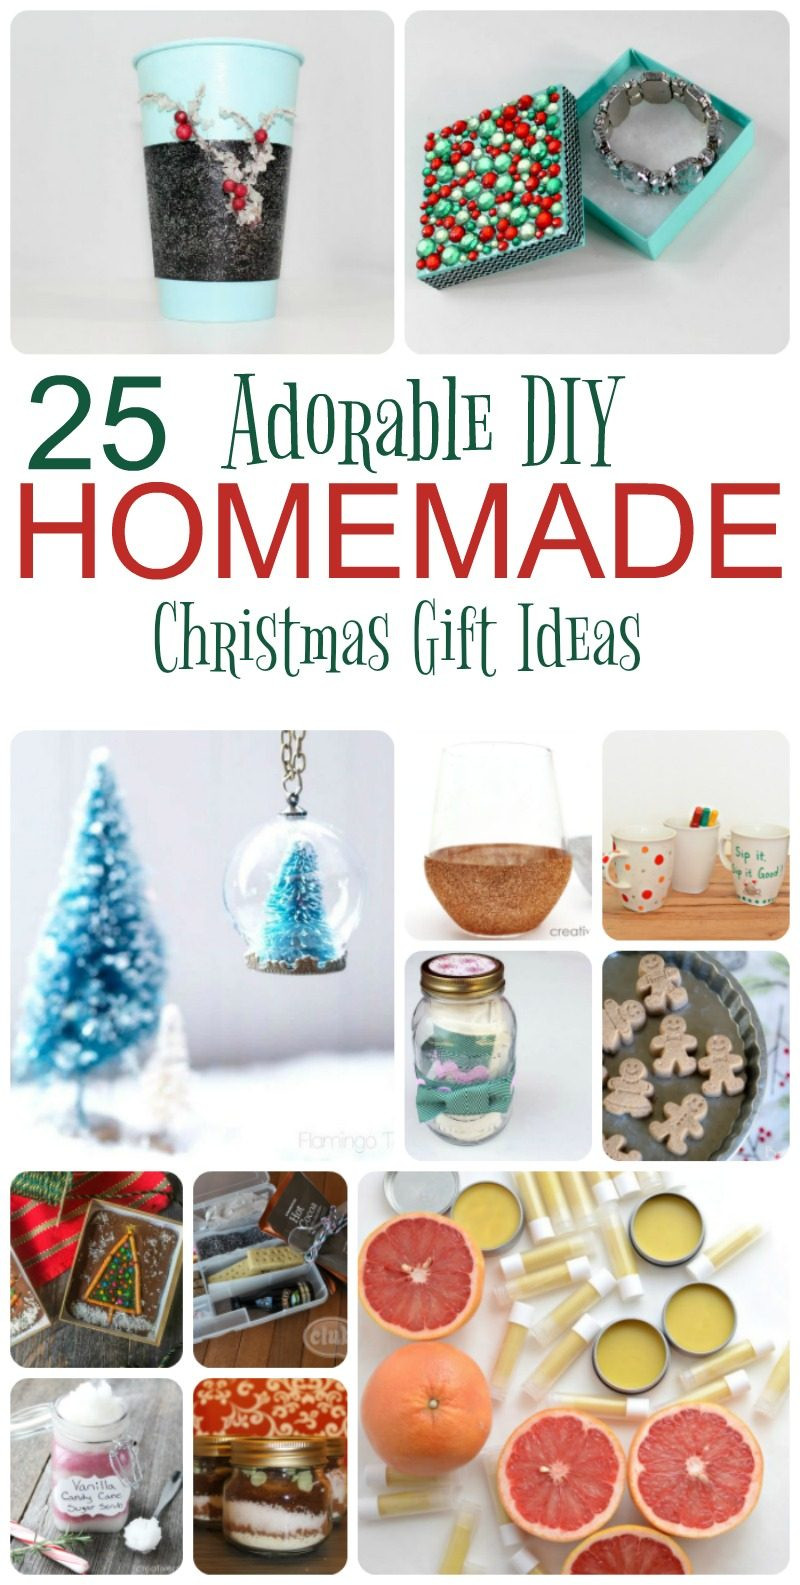 Gift Ideas For Adult Children
 25 Adorable Homemade Gifts to Make for Christmas Pretty